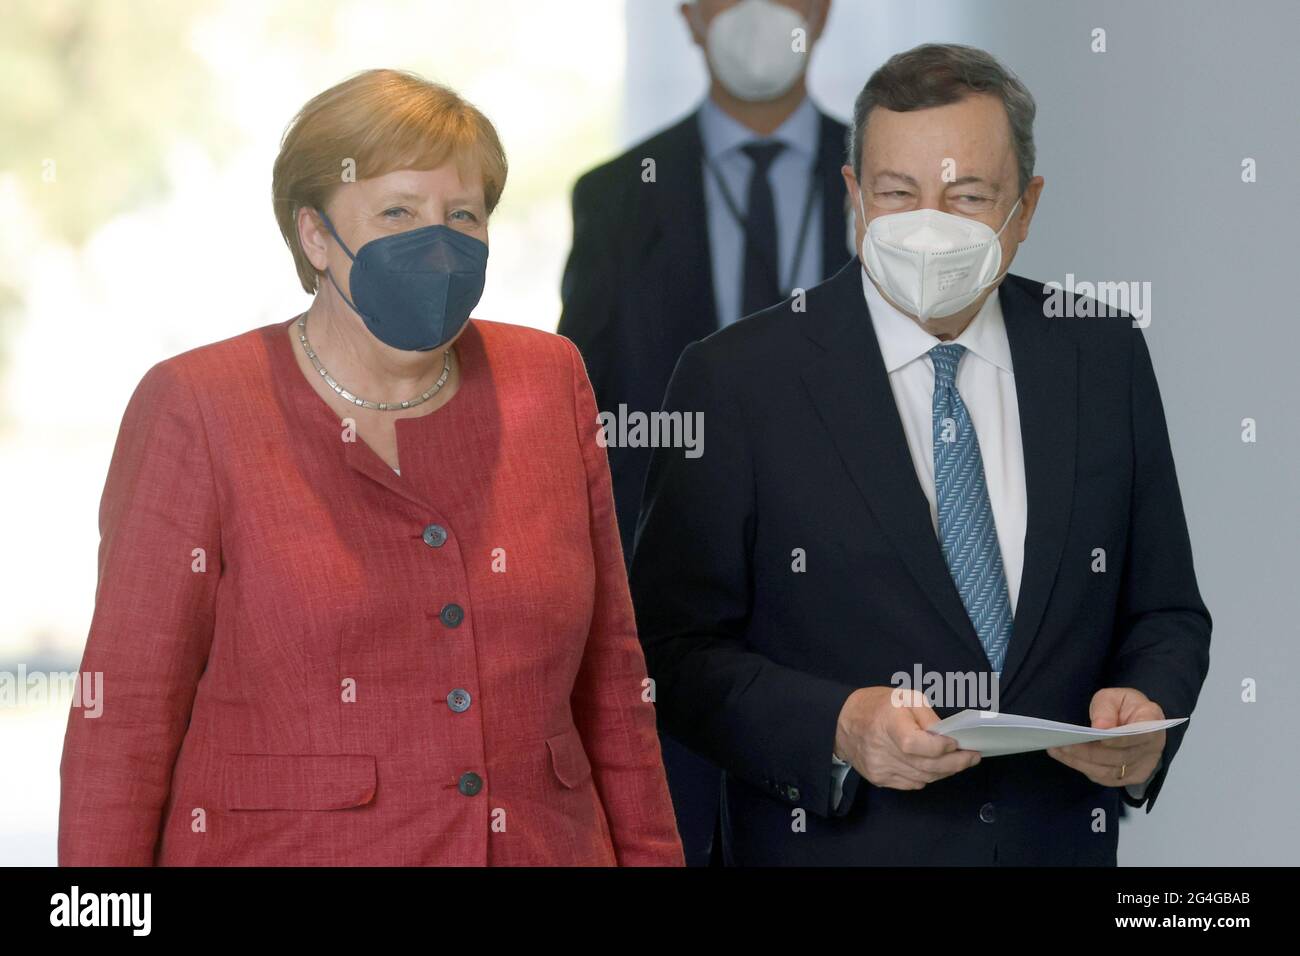 Berlin, Germany. 21st June, 2021. German Chancellor Angela Merkel (l, CDU) and Mario Draghi, Prime Minister of Italy, arrive for their press conference at the Federal Chancellery. Draghi is in Berlin for his inaugural visit. Credit: Odd Andersen/AFP-Pool/dpa/Alamy Live News Stock Photo